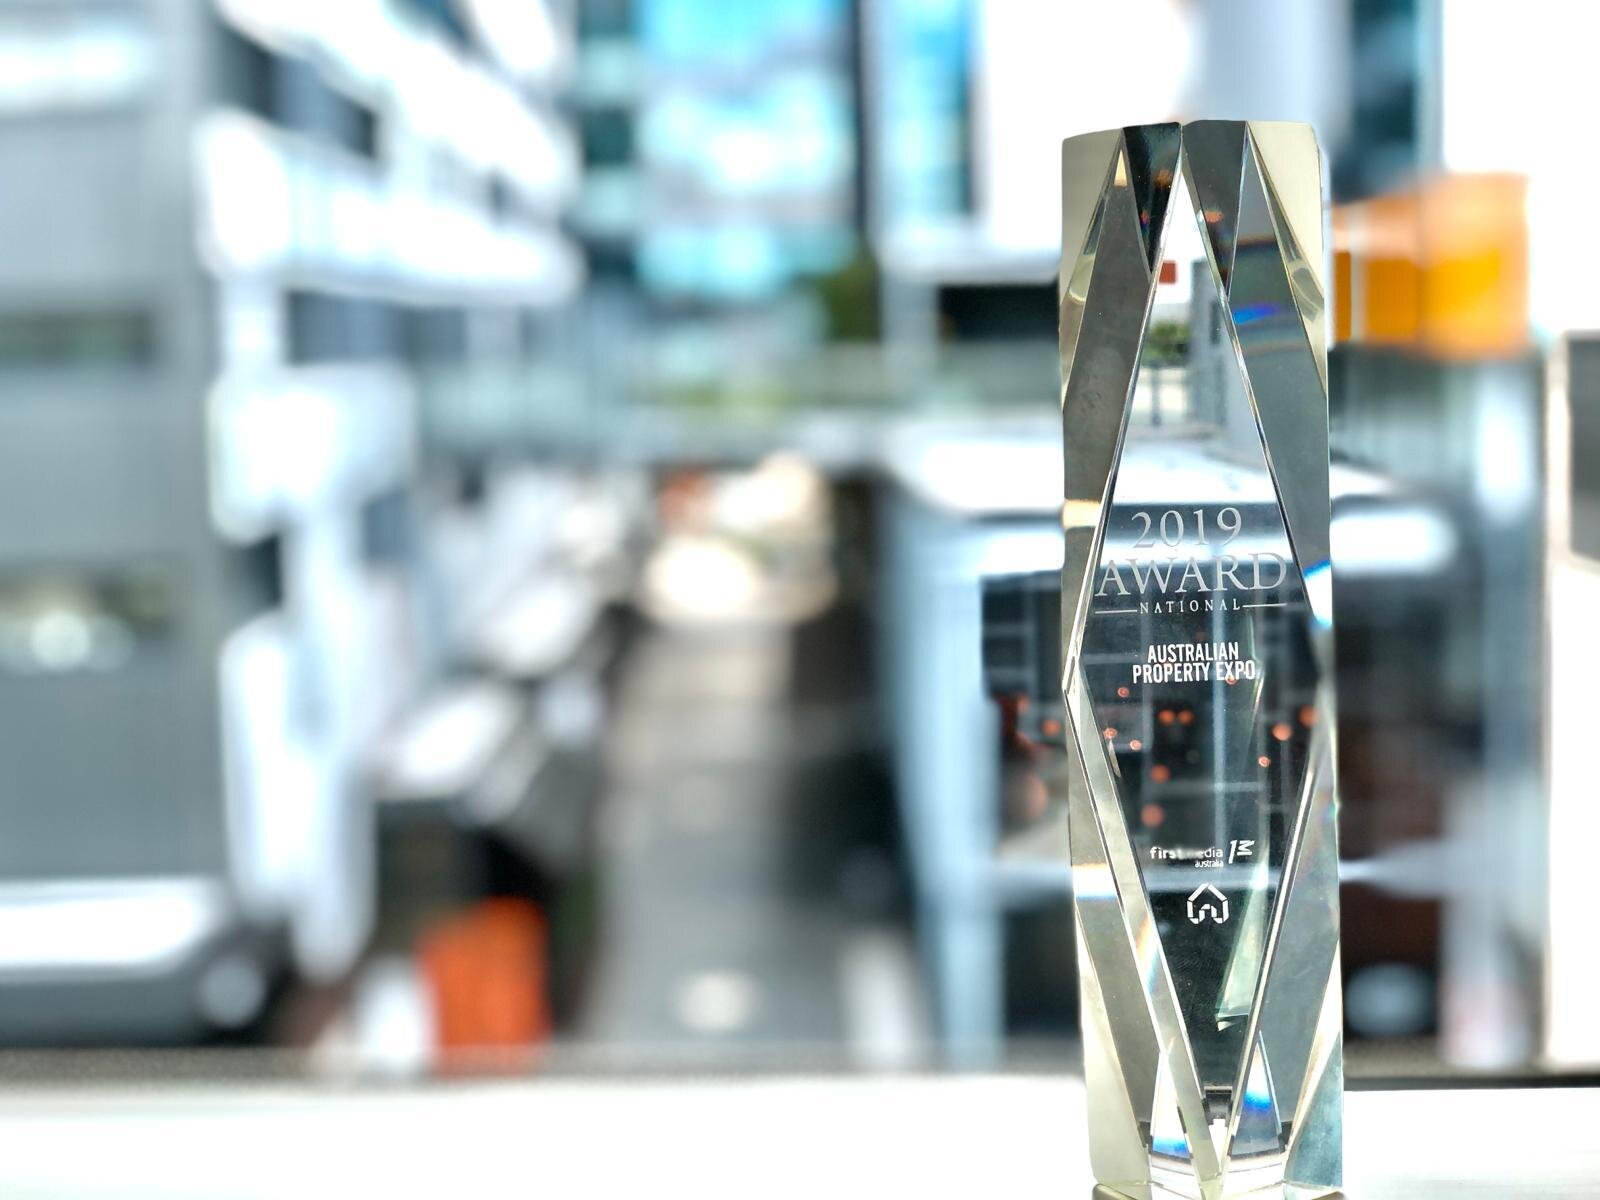 Australian Property Expo 2019 Award, Awarded to Andrew Thomson, General Manager.